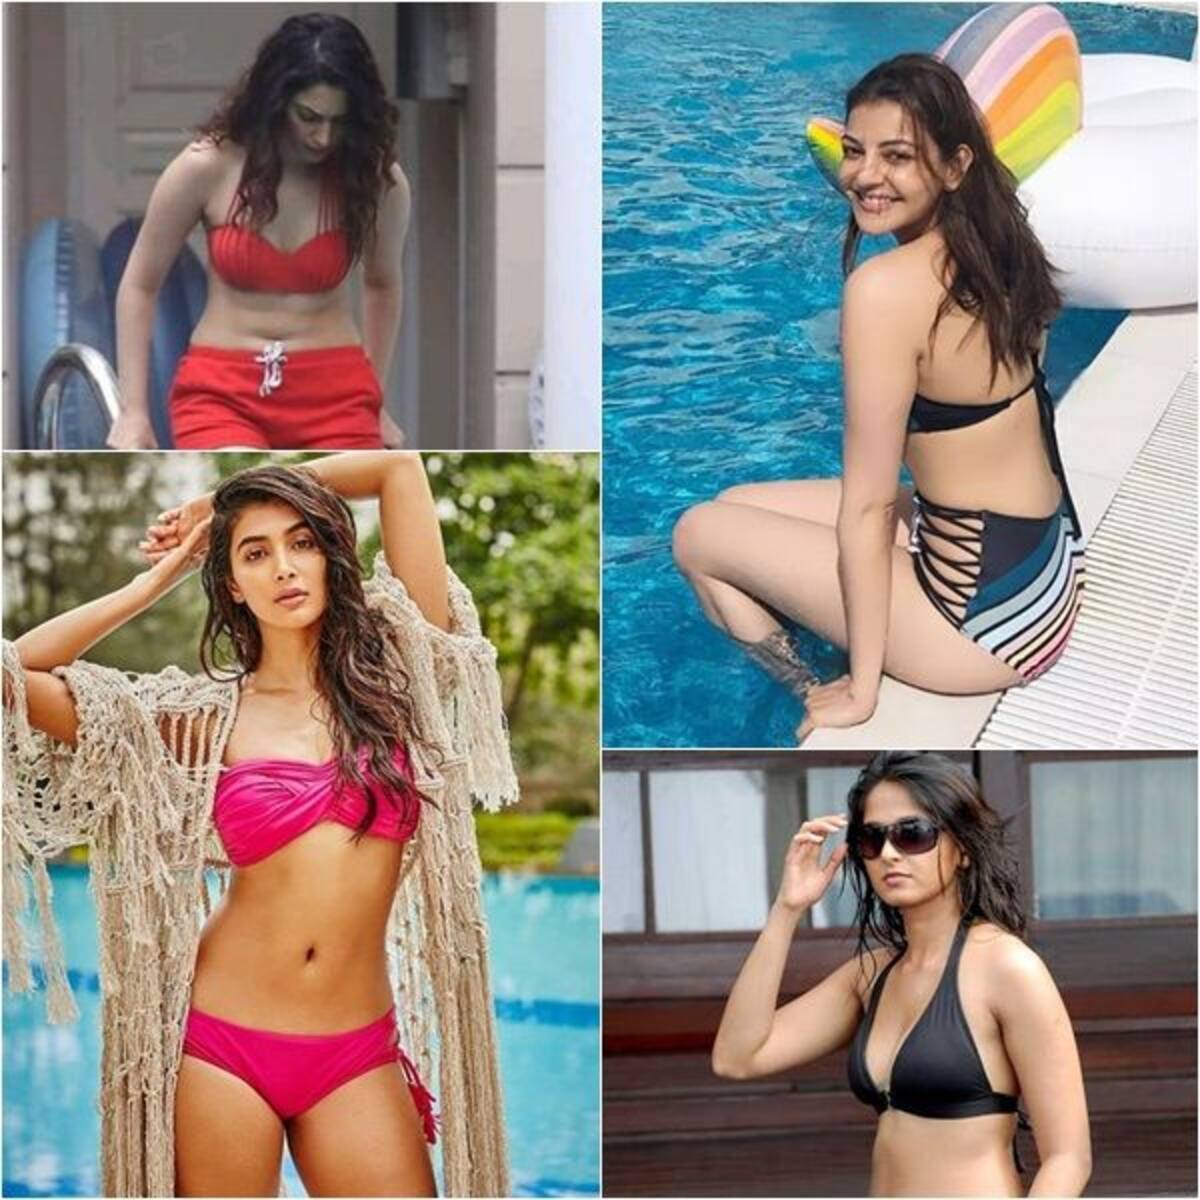 From Tamannaah Bhatia to Kajal Aggarwal: 9 South Indian bikini beauties  that will beat Bollywood babes on the hotness meter